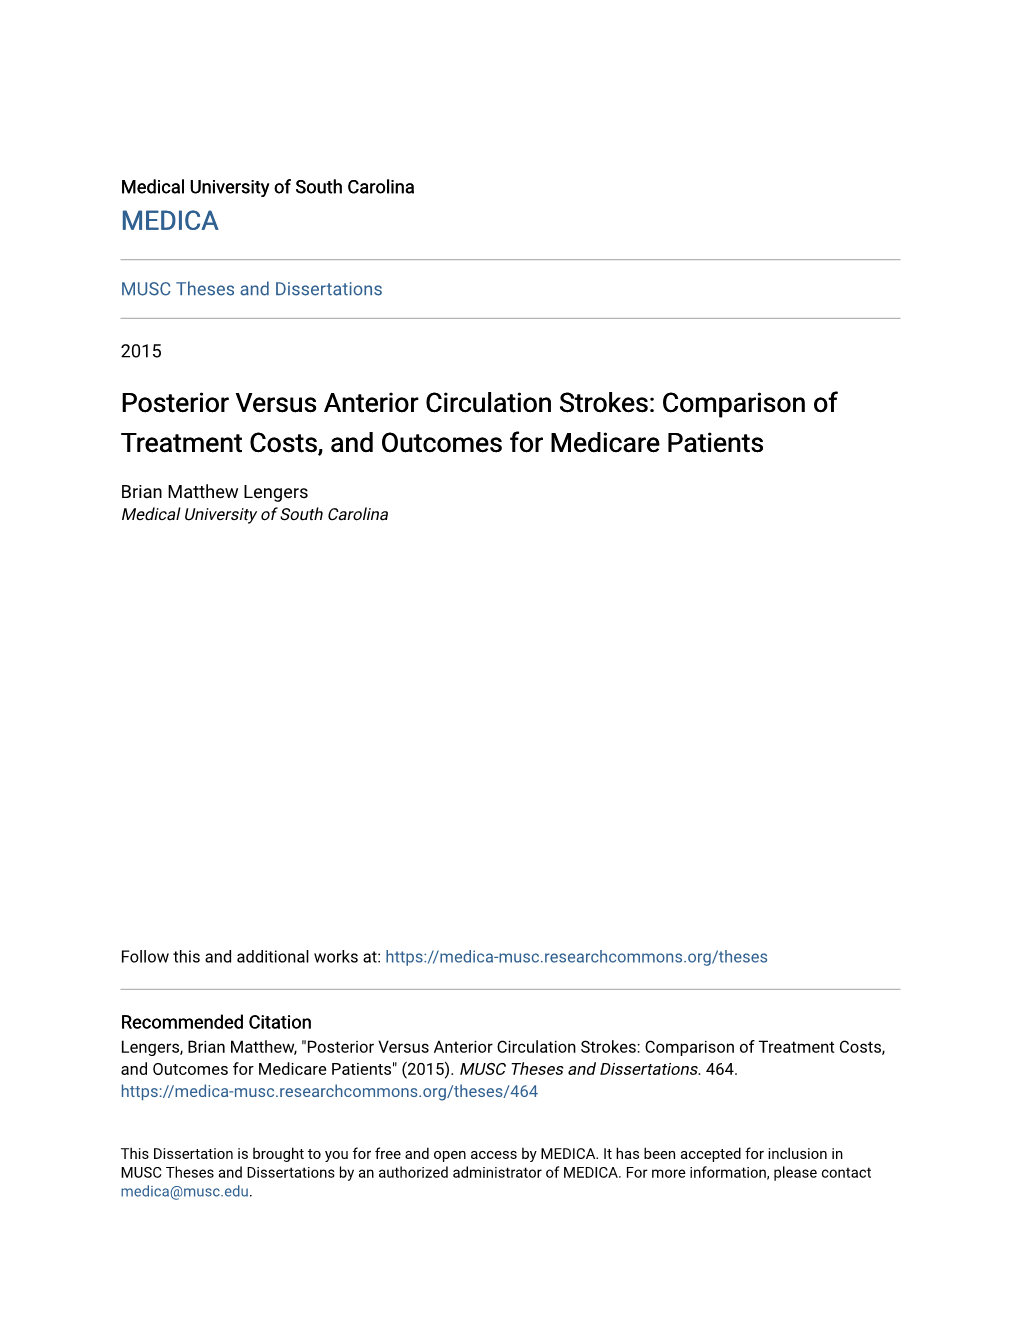 Posterior Versus Anterior Circulation Strokes: Comparison of Treatment Costs, and Outcomes for Medicare Patients